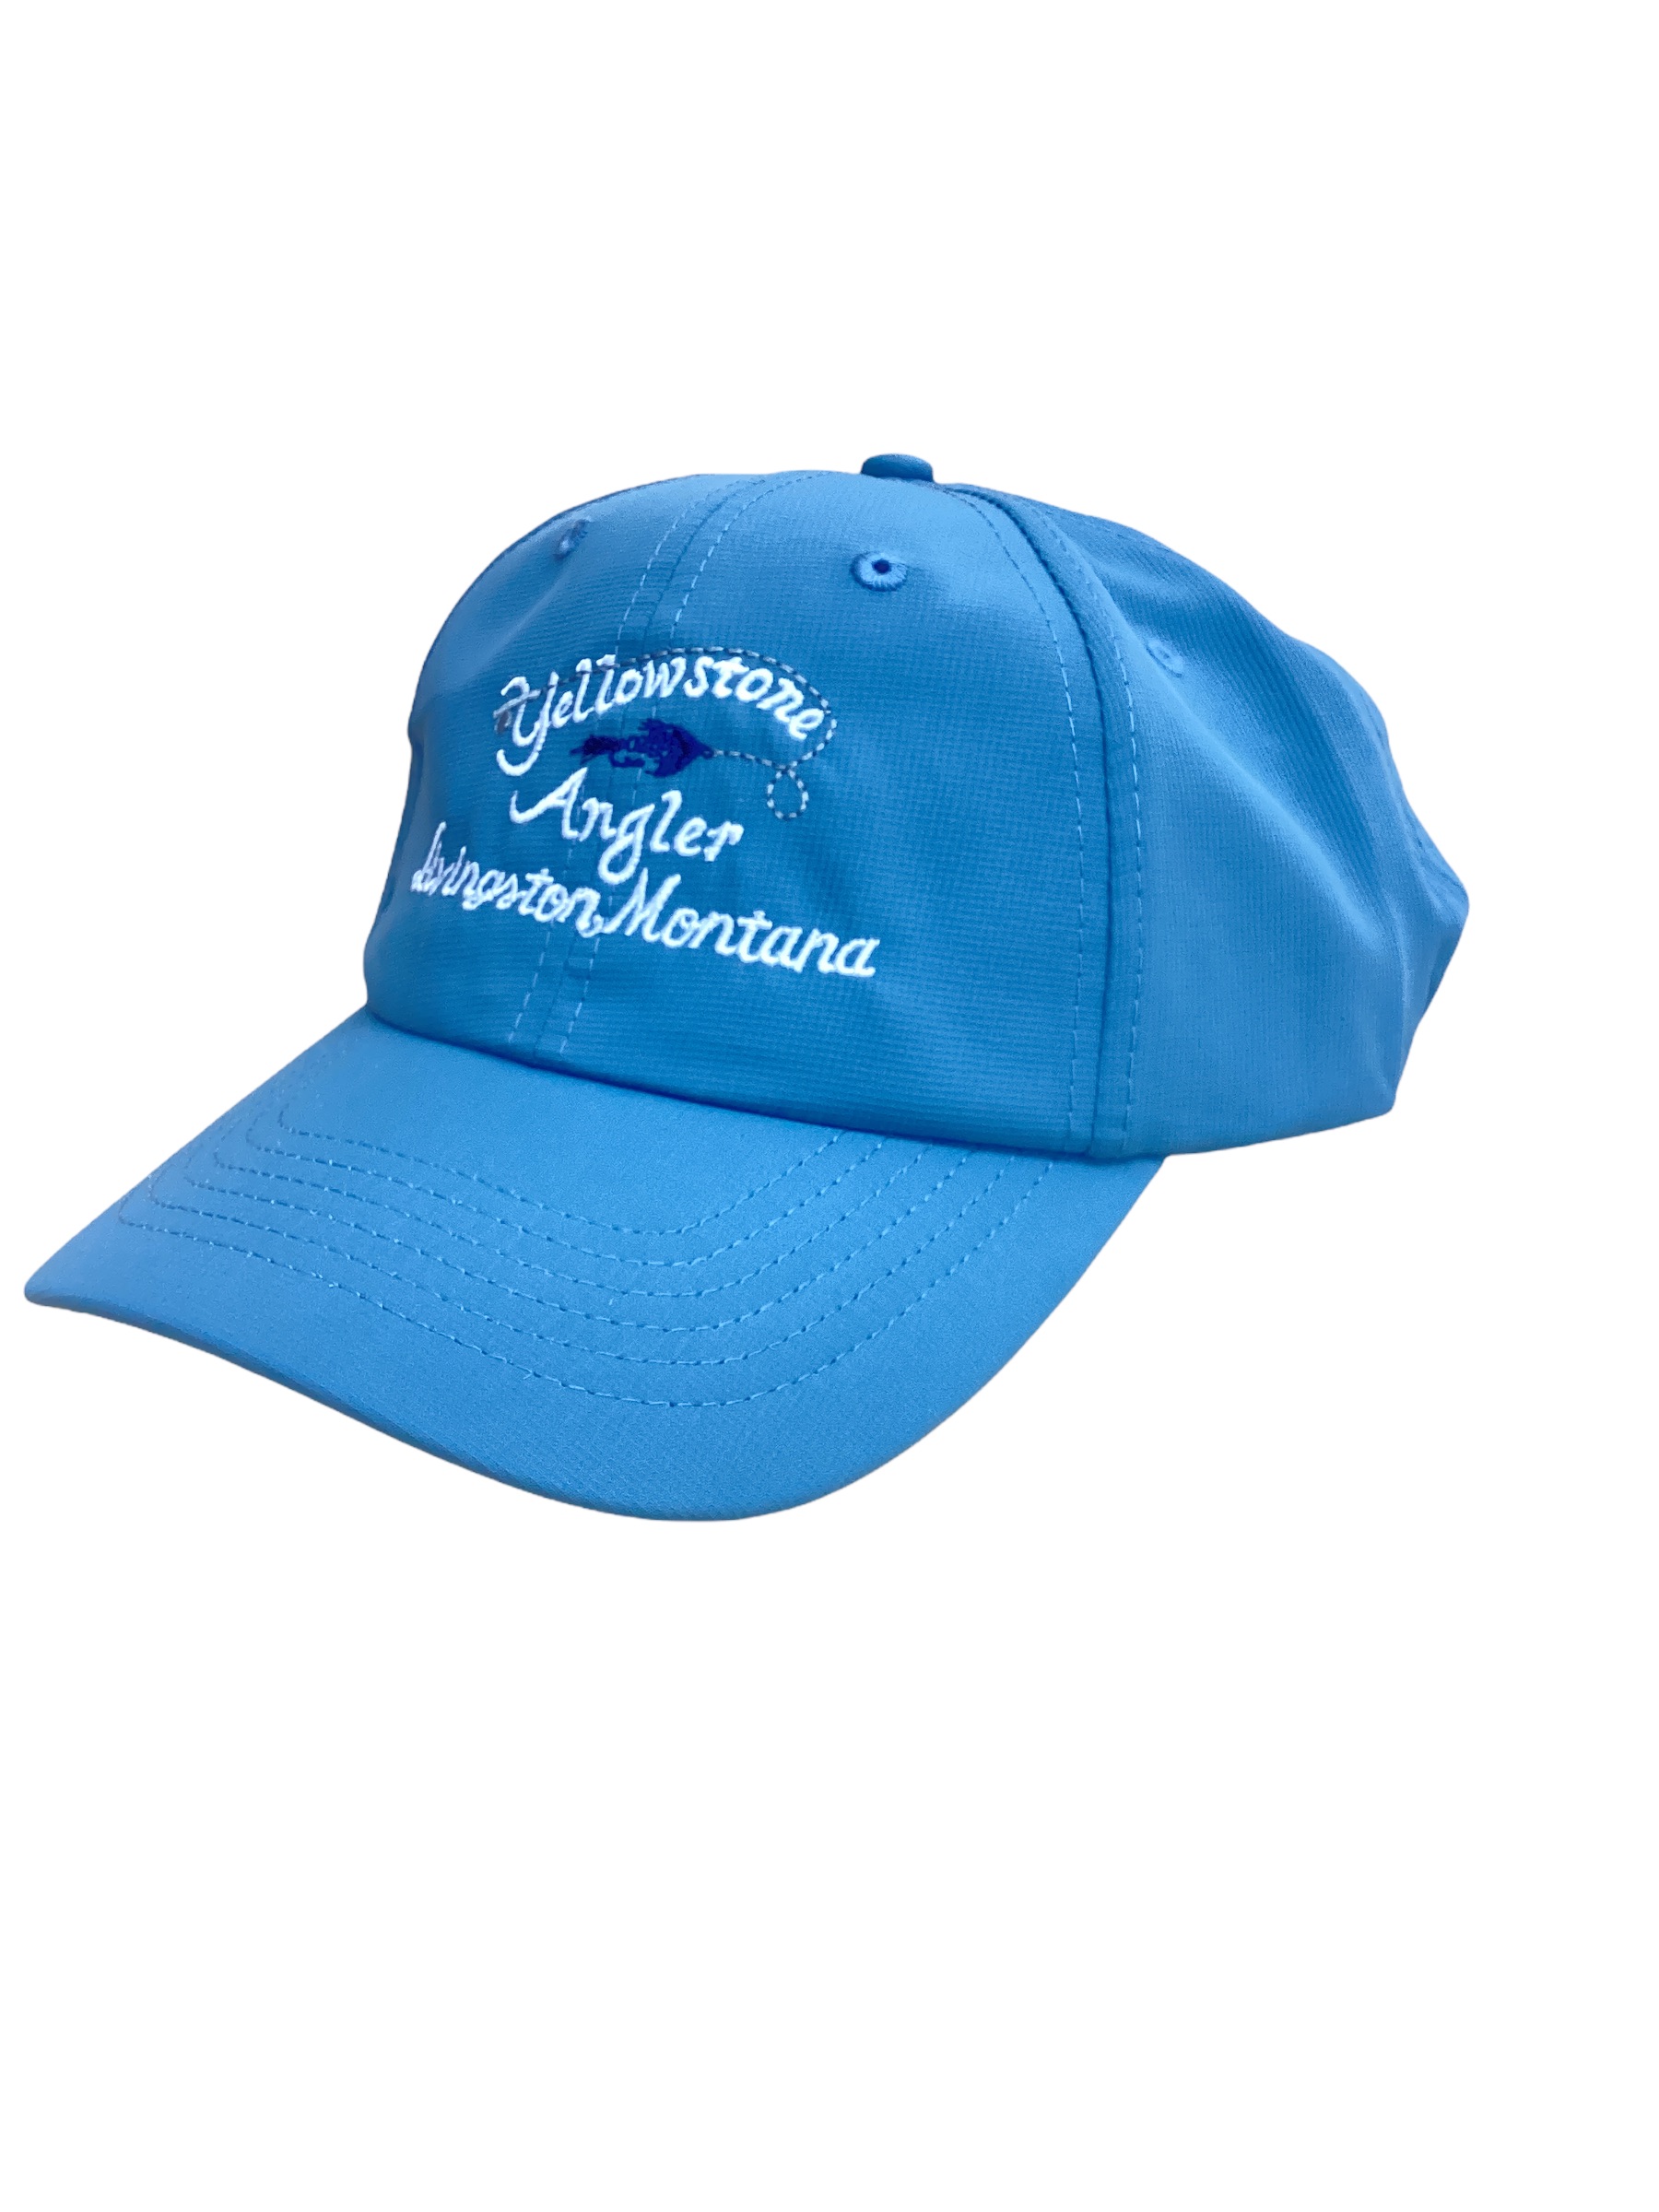 Yellowstone Angler XL fit hat